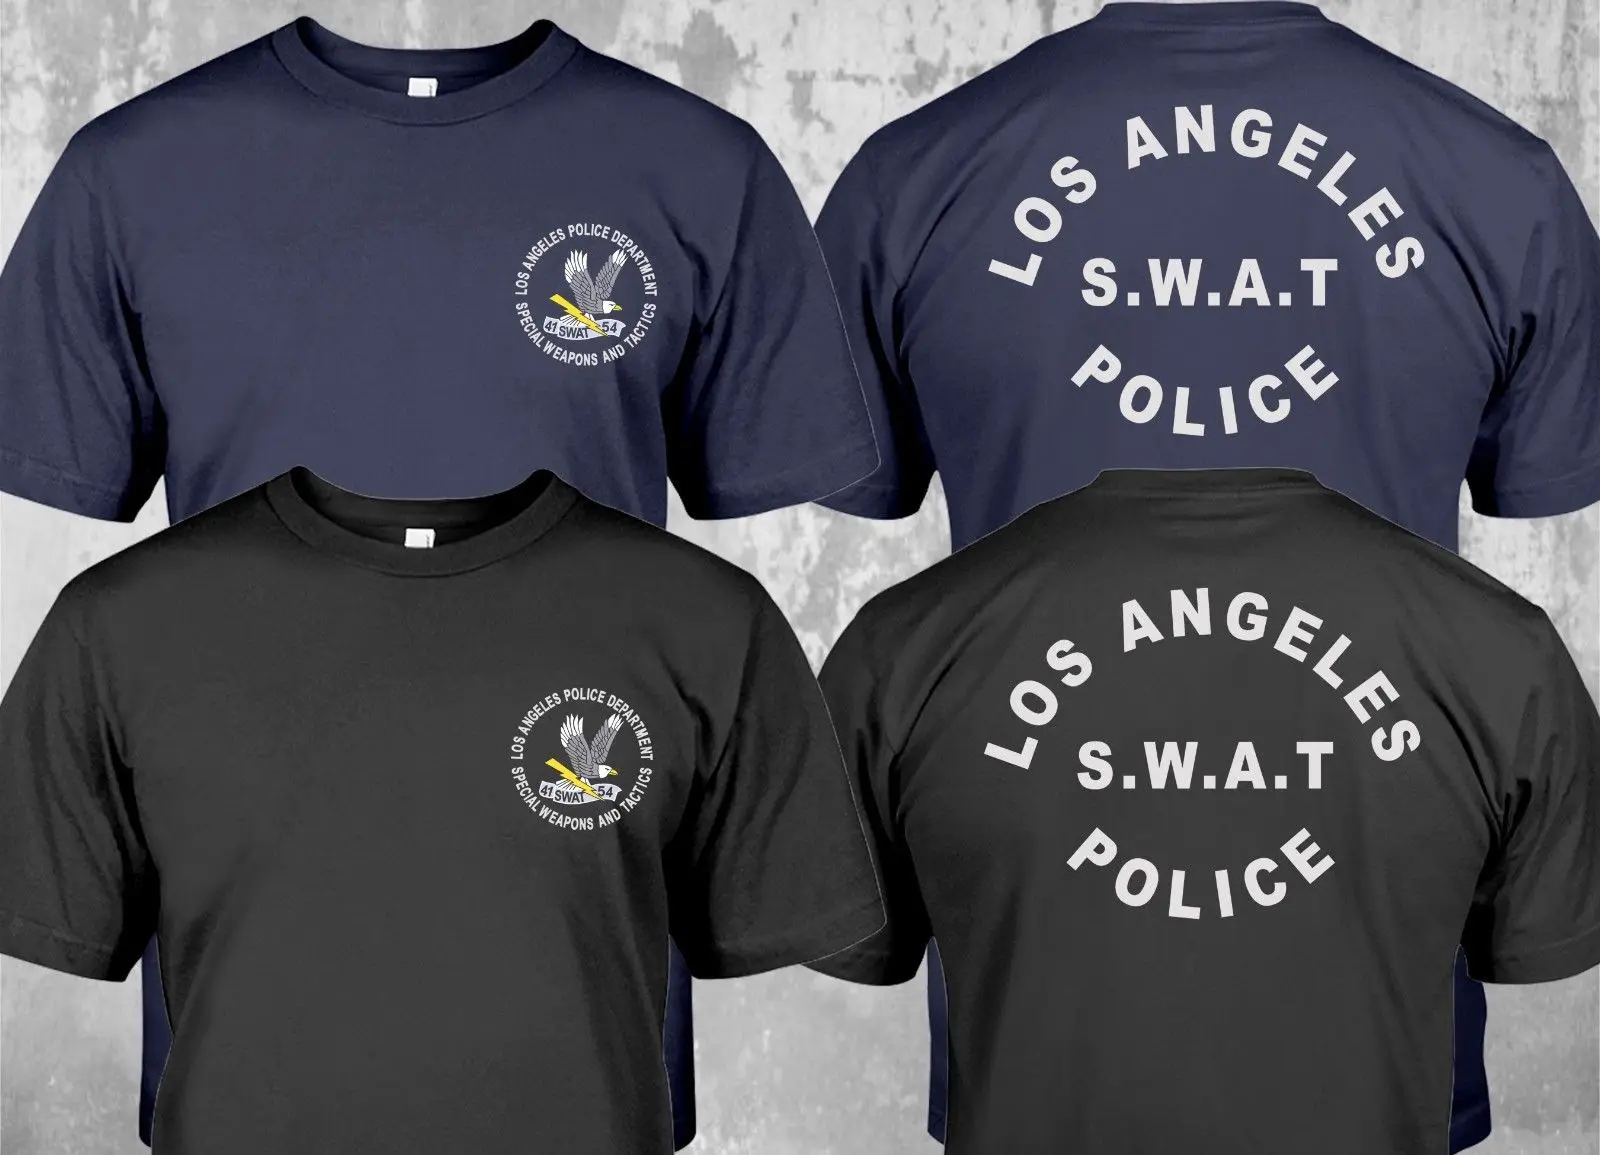 

SWAT Los Angeles Police Department TV Series Security Investigation T-Shirt. Summer Cotton Short Sleeve O-Neck Mens T Shirt New